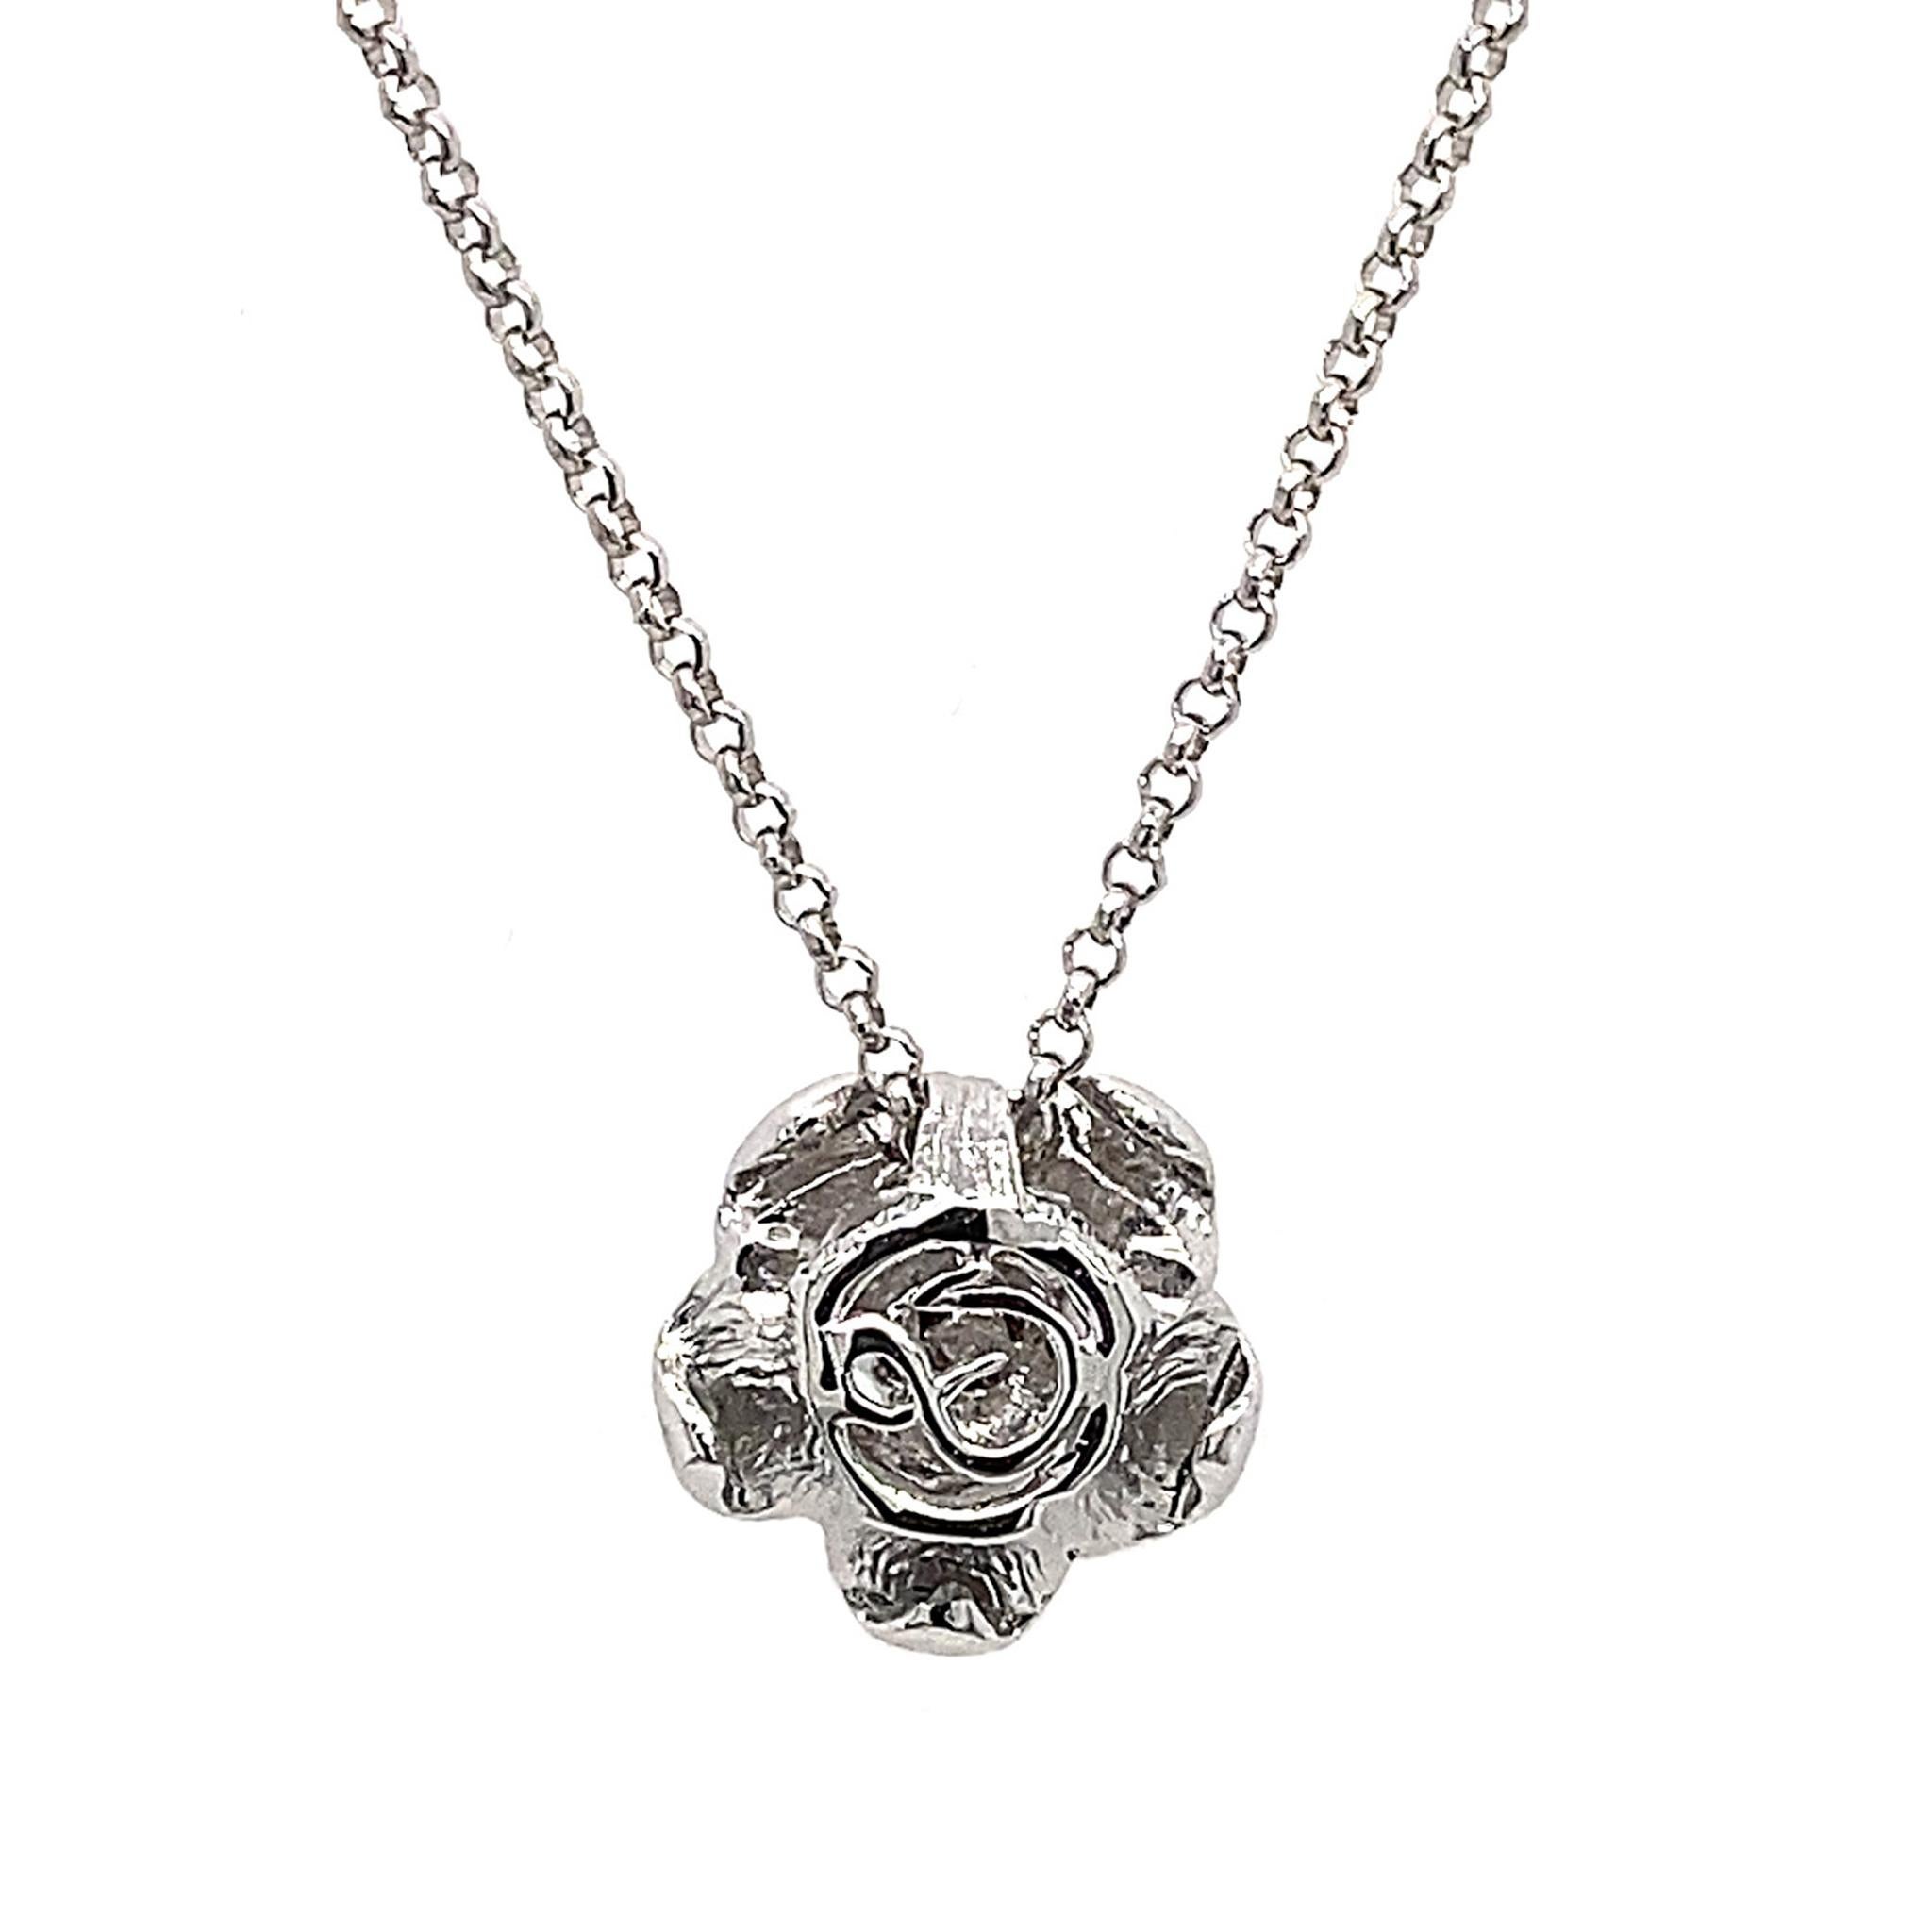 A blooming rose ­- the universal symbol for love, beauty and gratitude. 

Dilys' Blooming Rose Solitaire Diamond Necklace features the rose motif with a round collection-grade solitaire diamond as the centrestone (0.07ct). Set in 18K white gold,